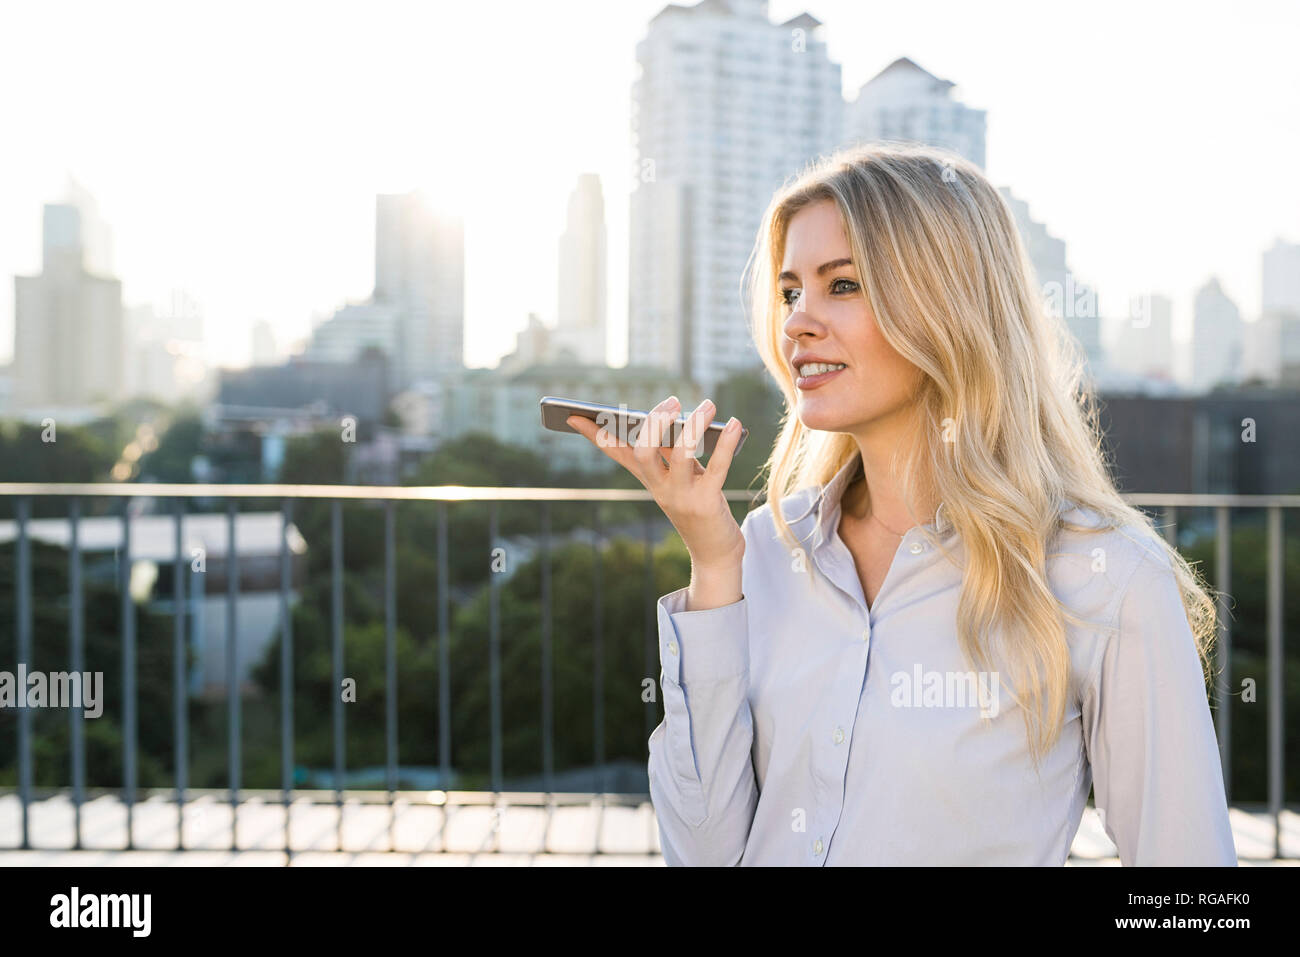 Blonde business woman speaking into smartphone on city rooftop Stock Photo